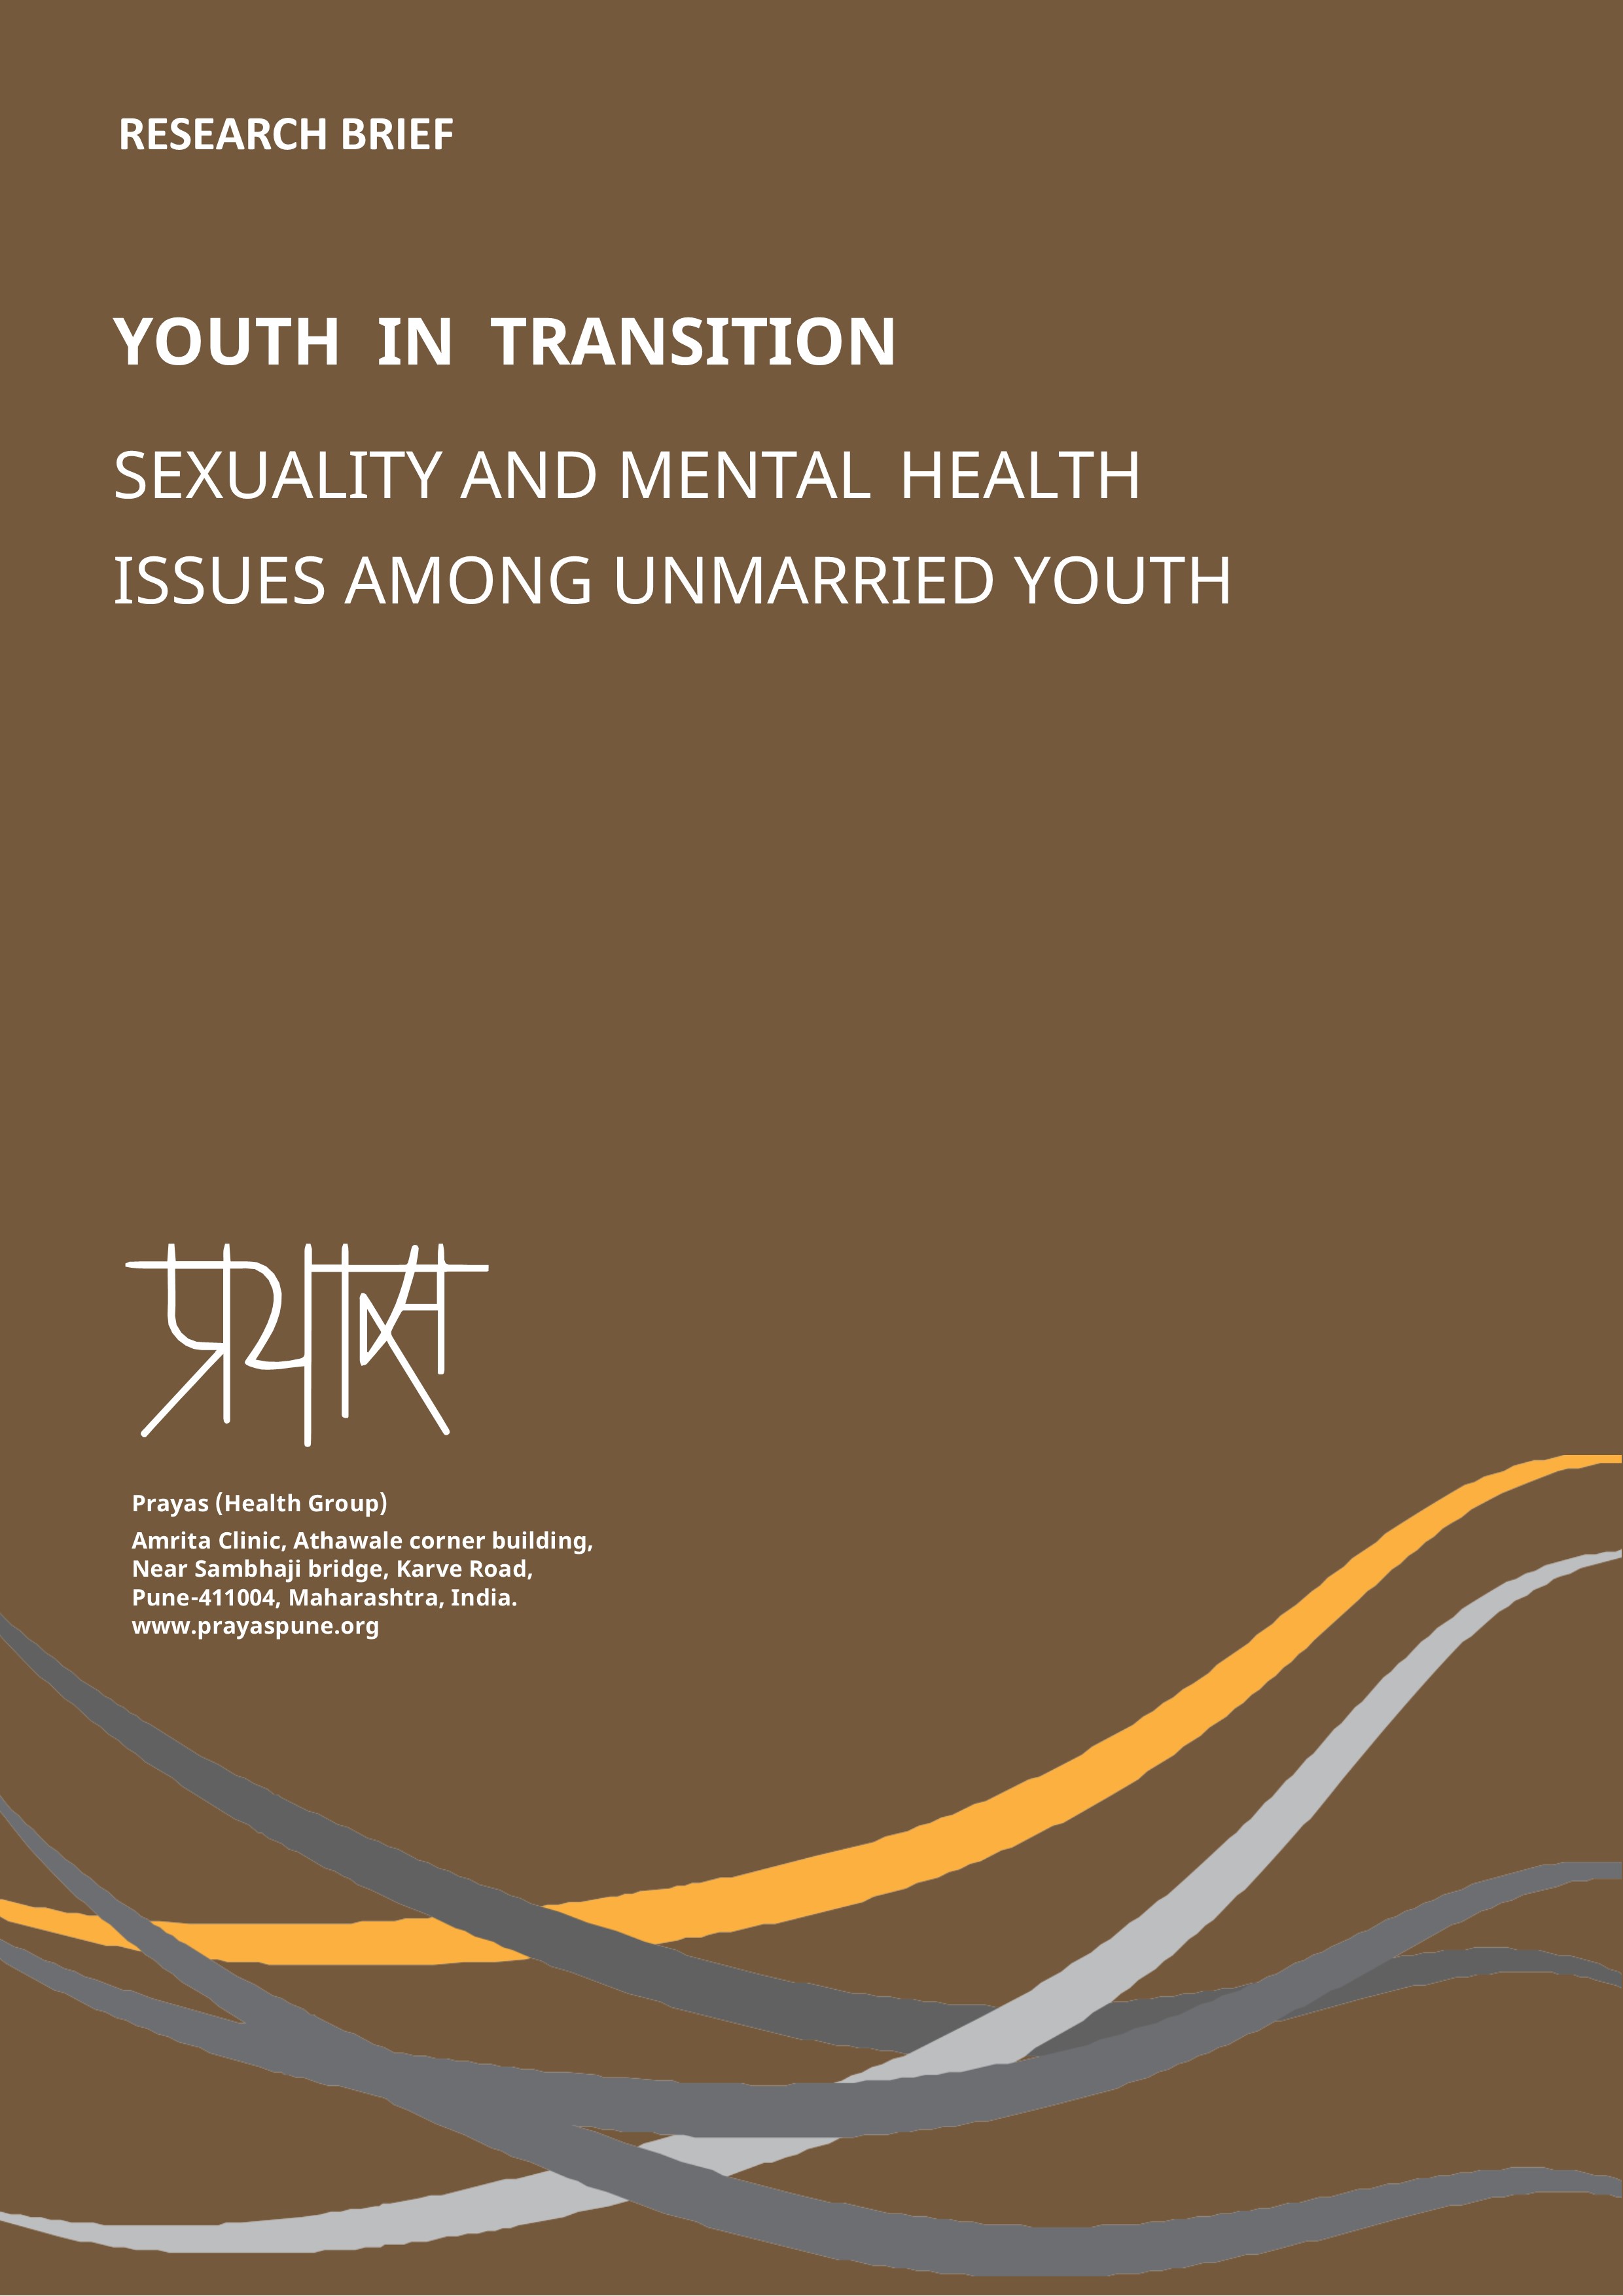 Sexuality and Mental Health Issues among Unmarried Youth